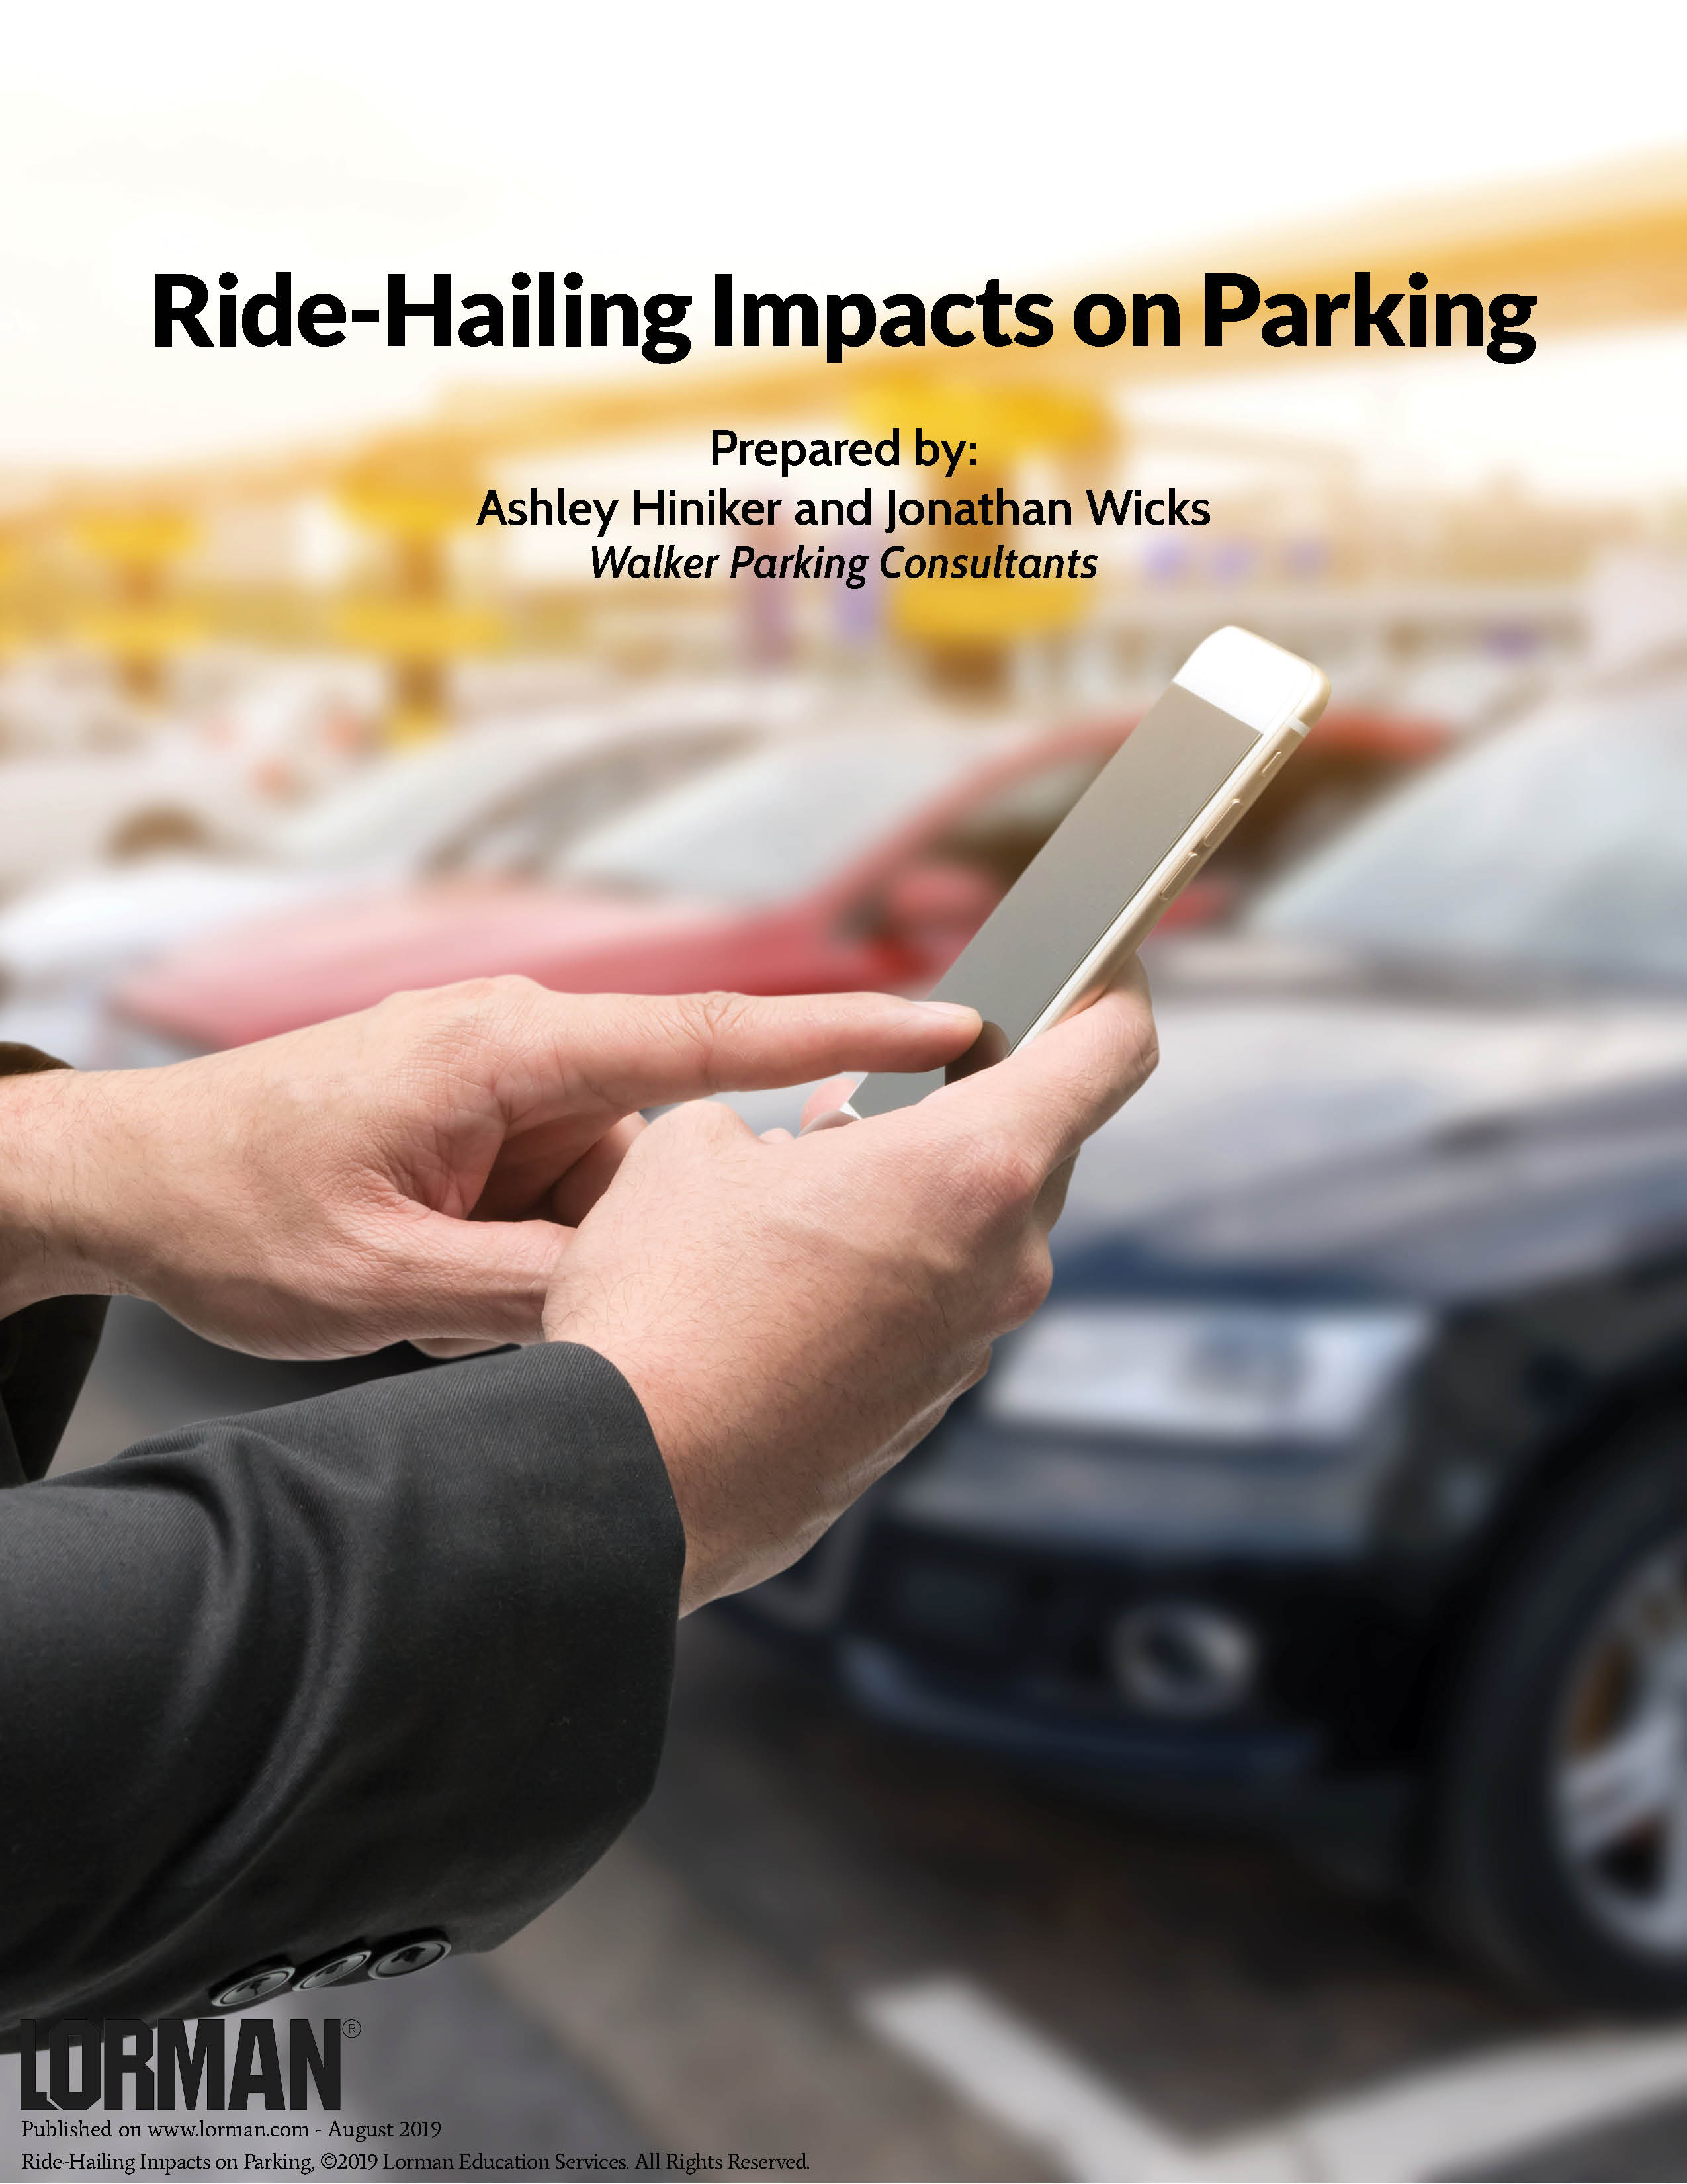 Ride-Hailing Impacts on Parking